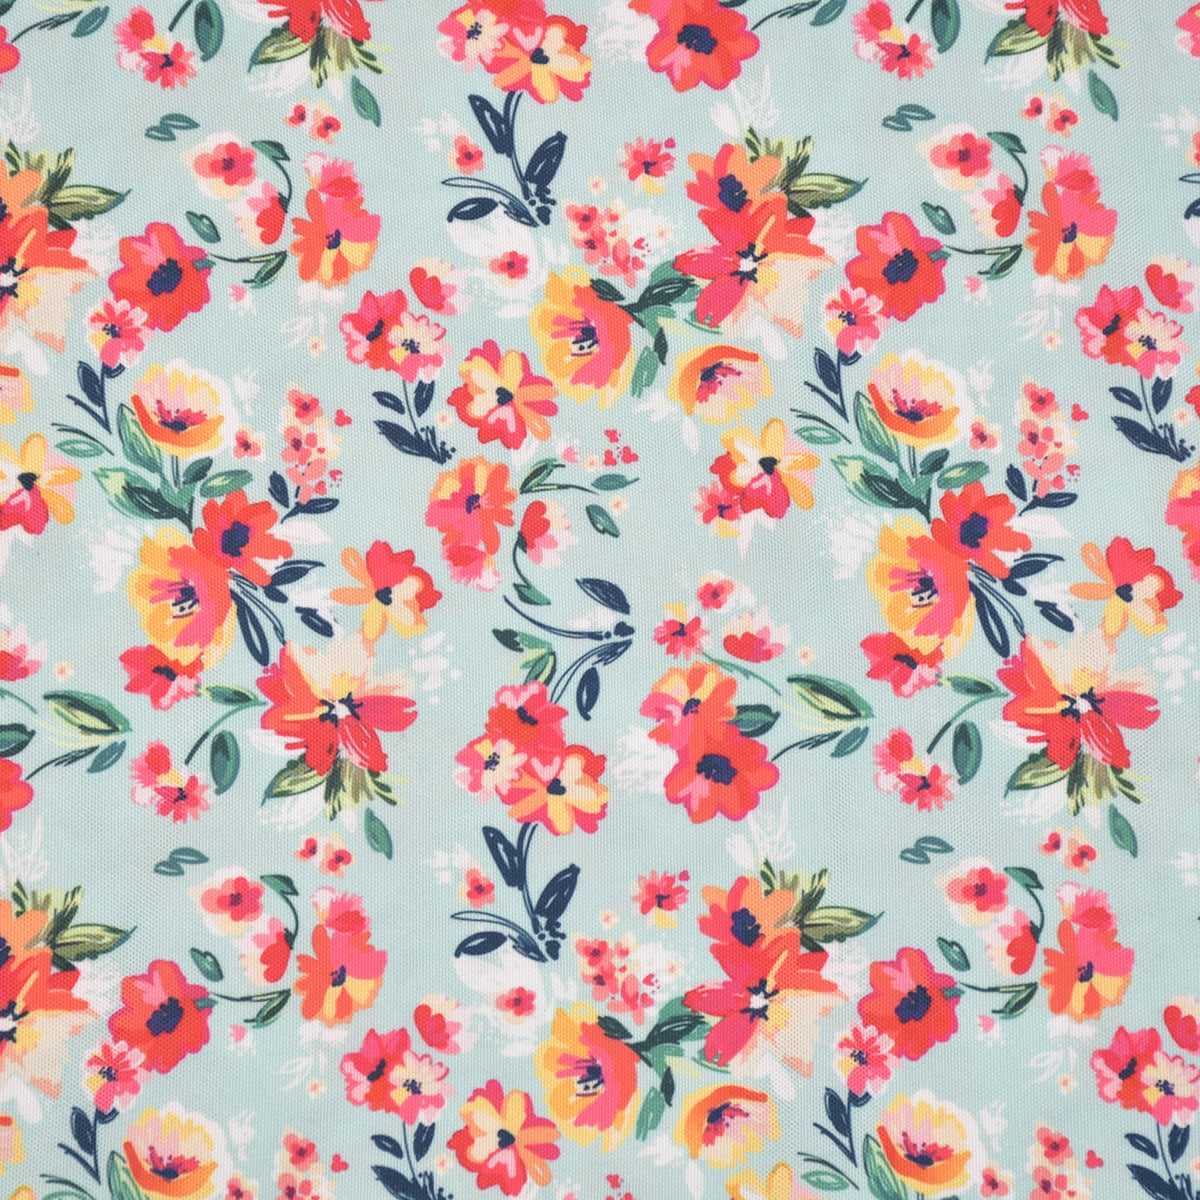 Blue and Pink Floral Fabric